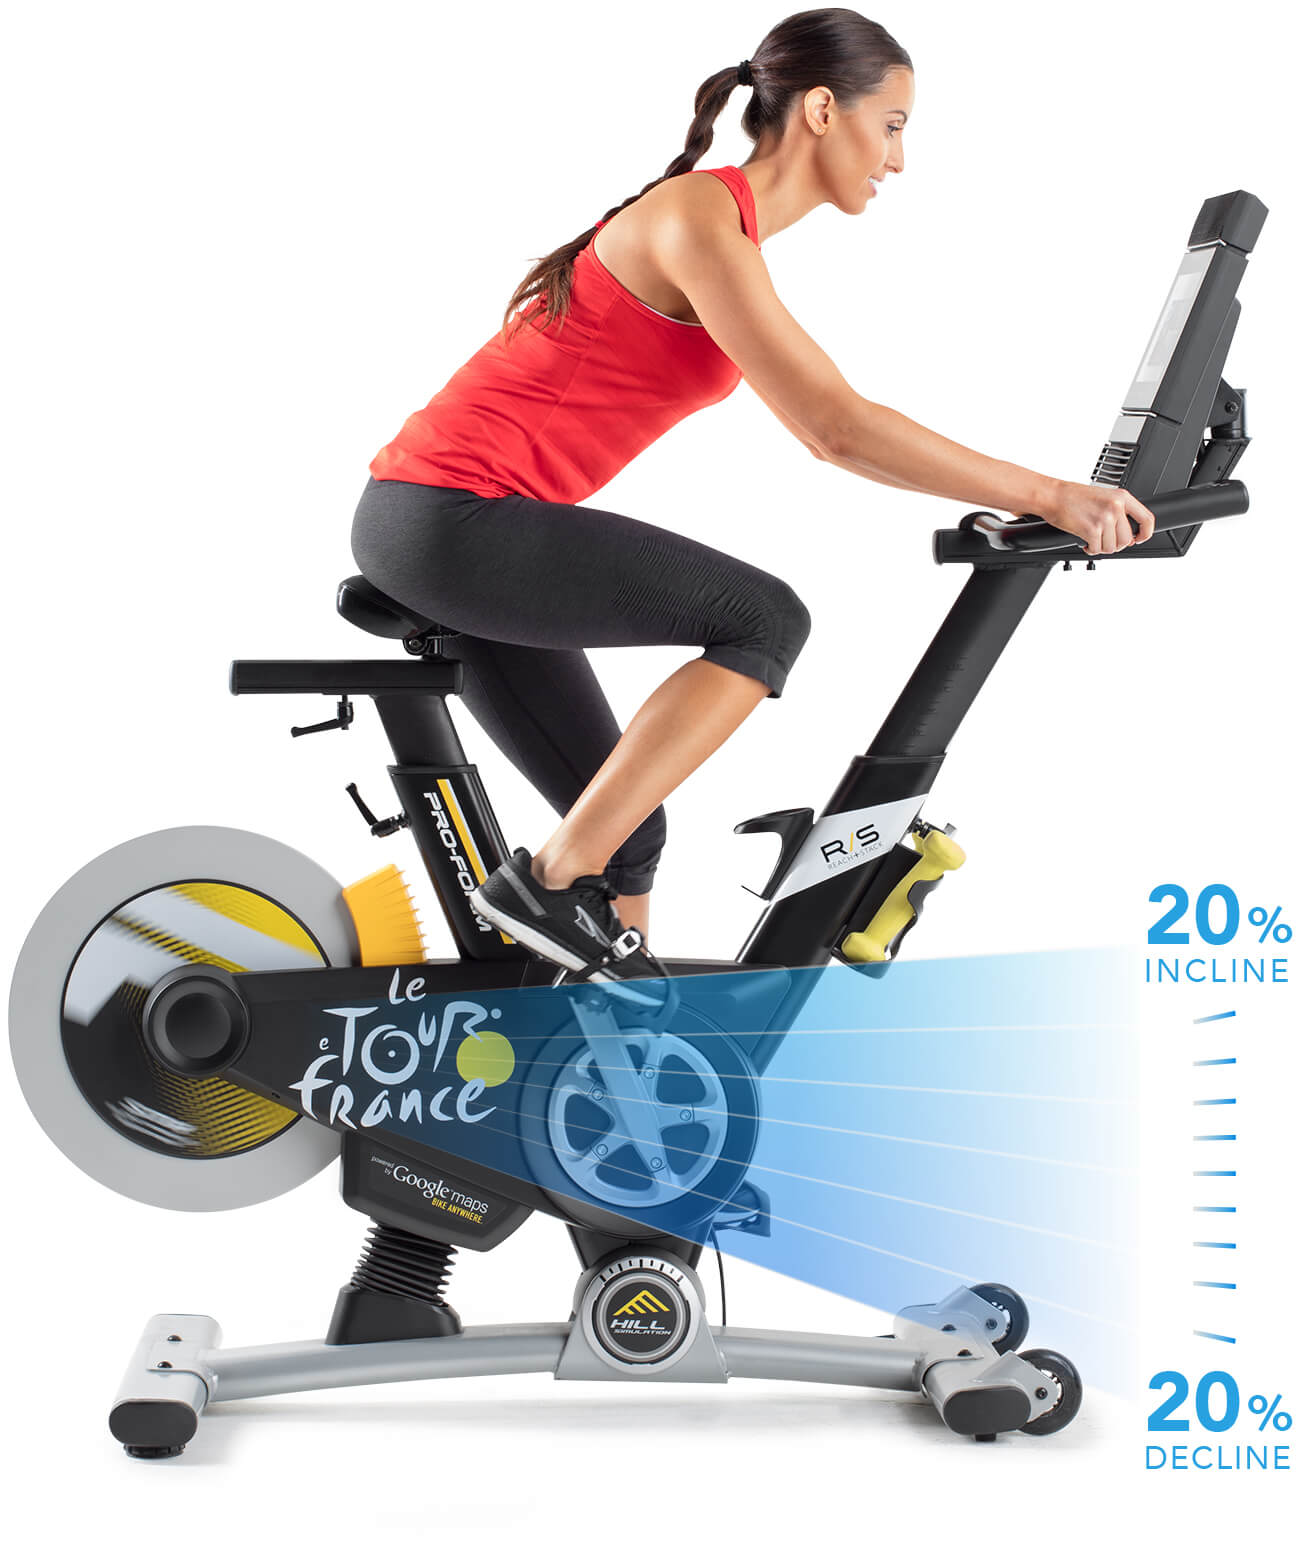 Bike with diagram showing that it can go from 20% incline to 20% decline